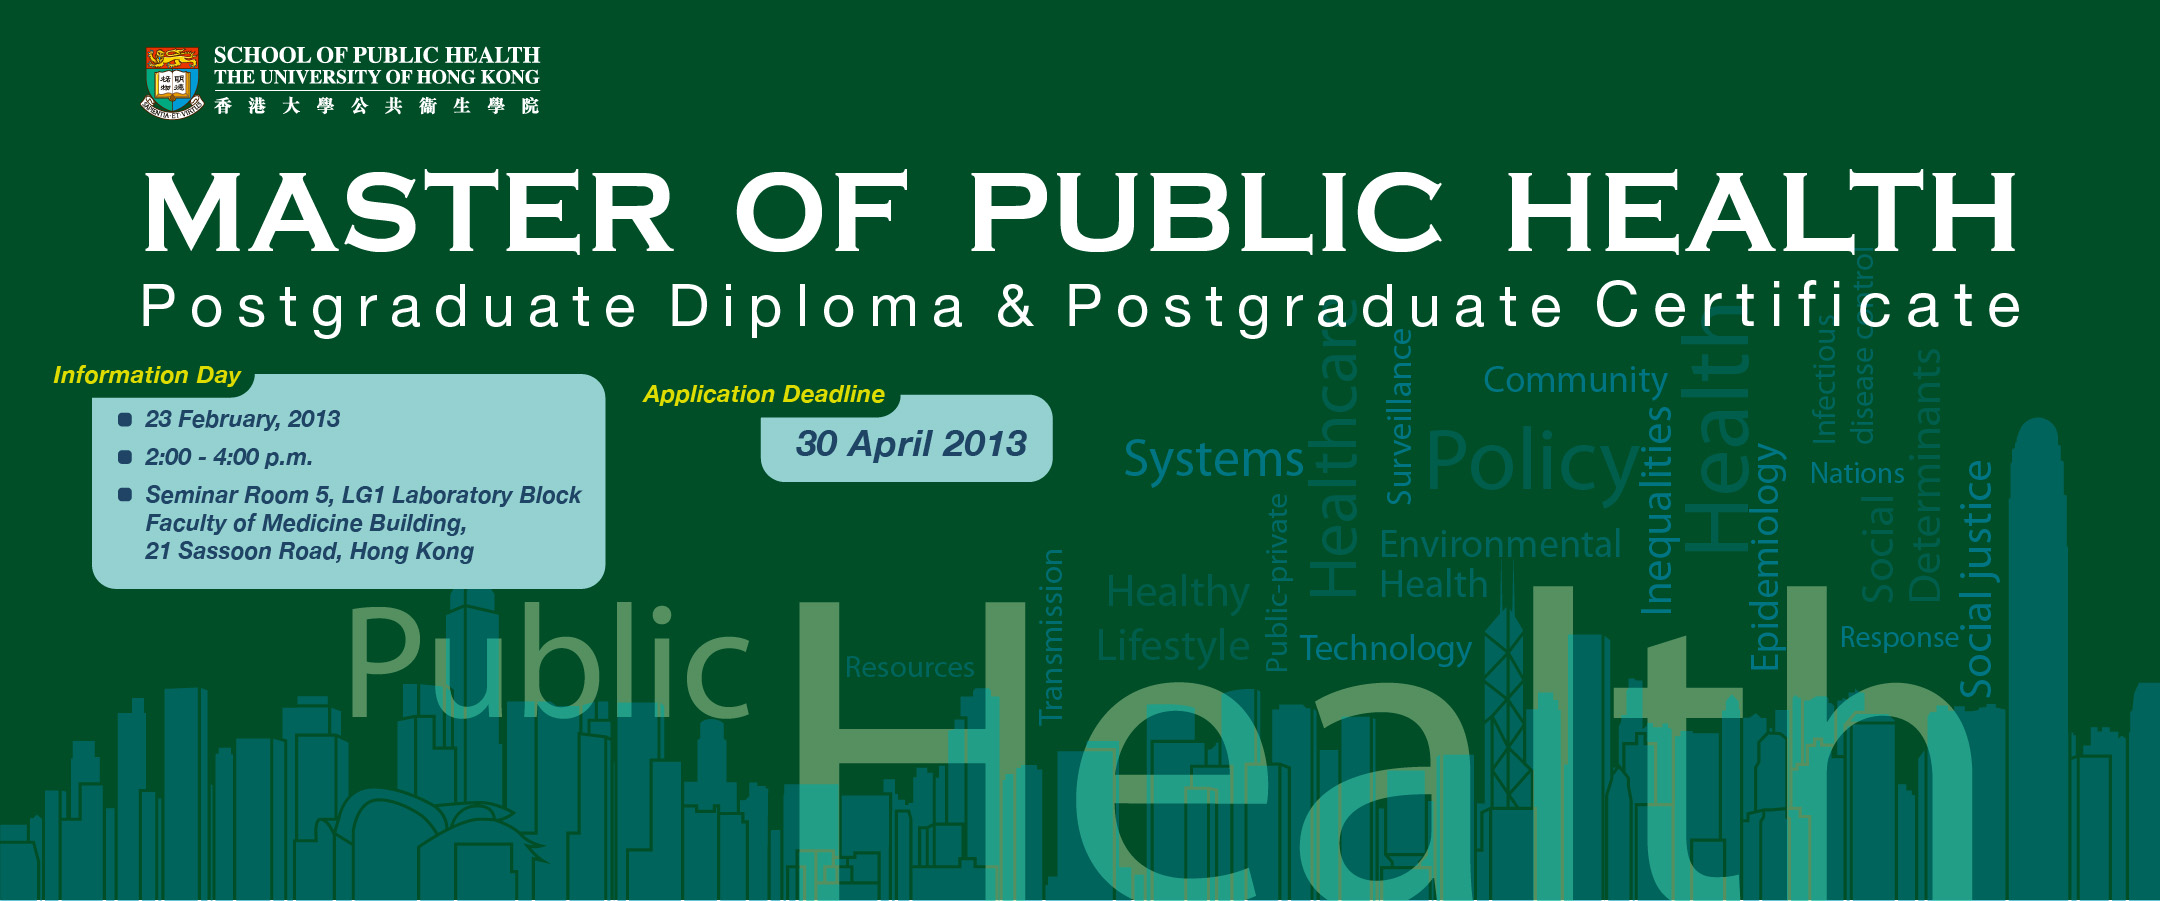 Master of Public Health Information Day 